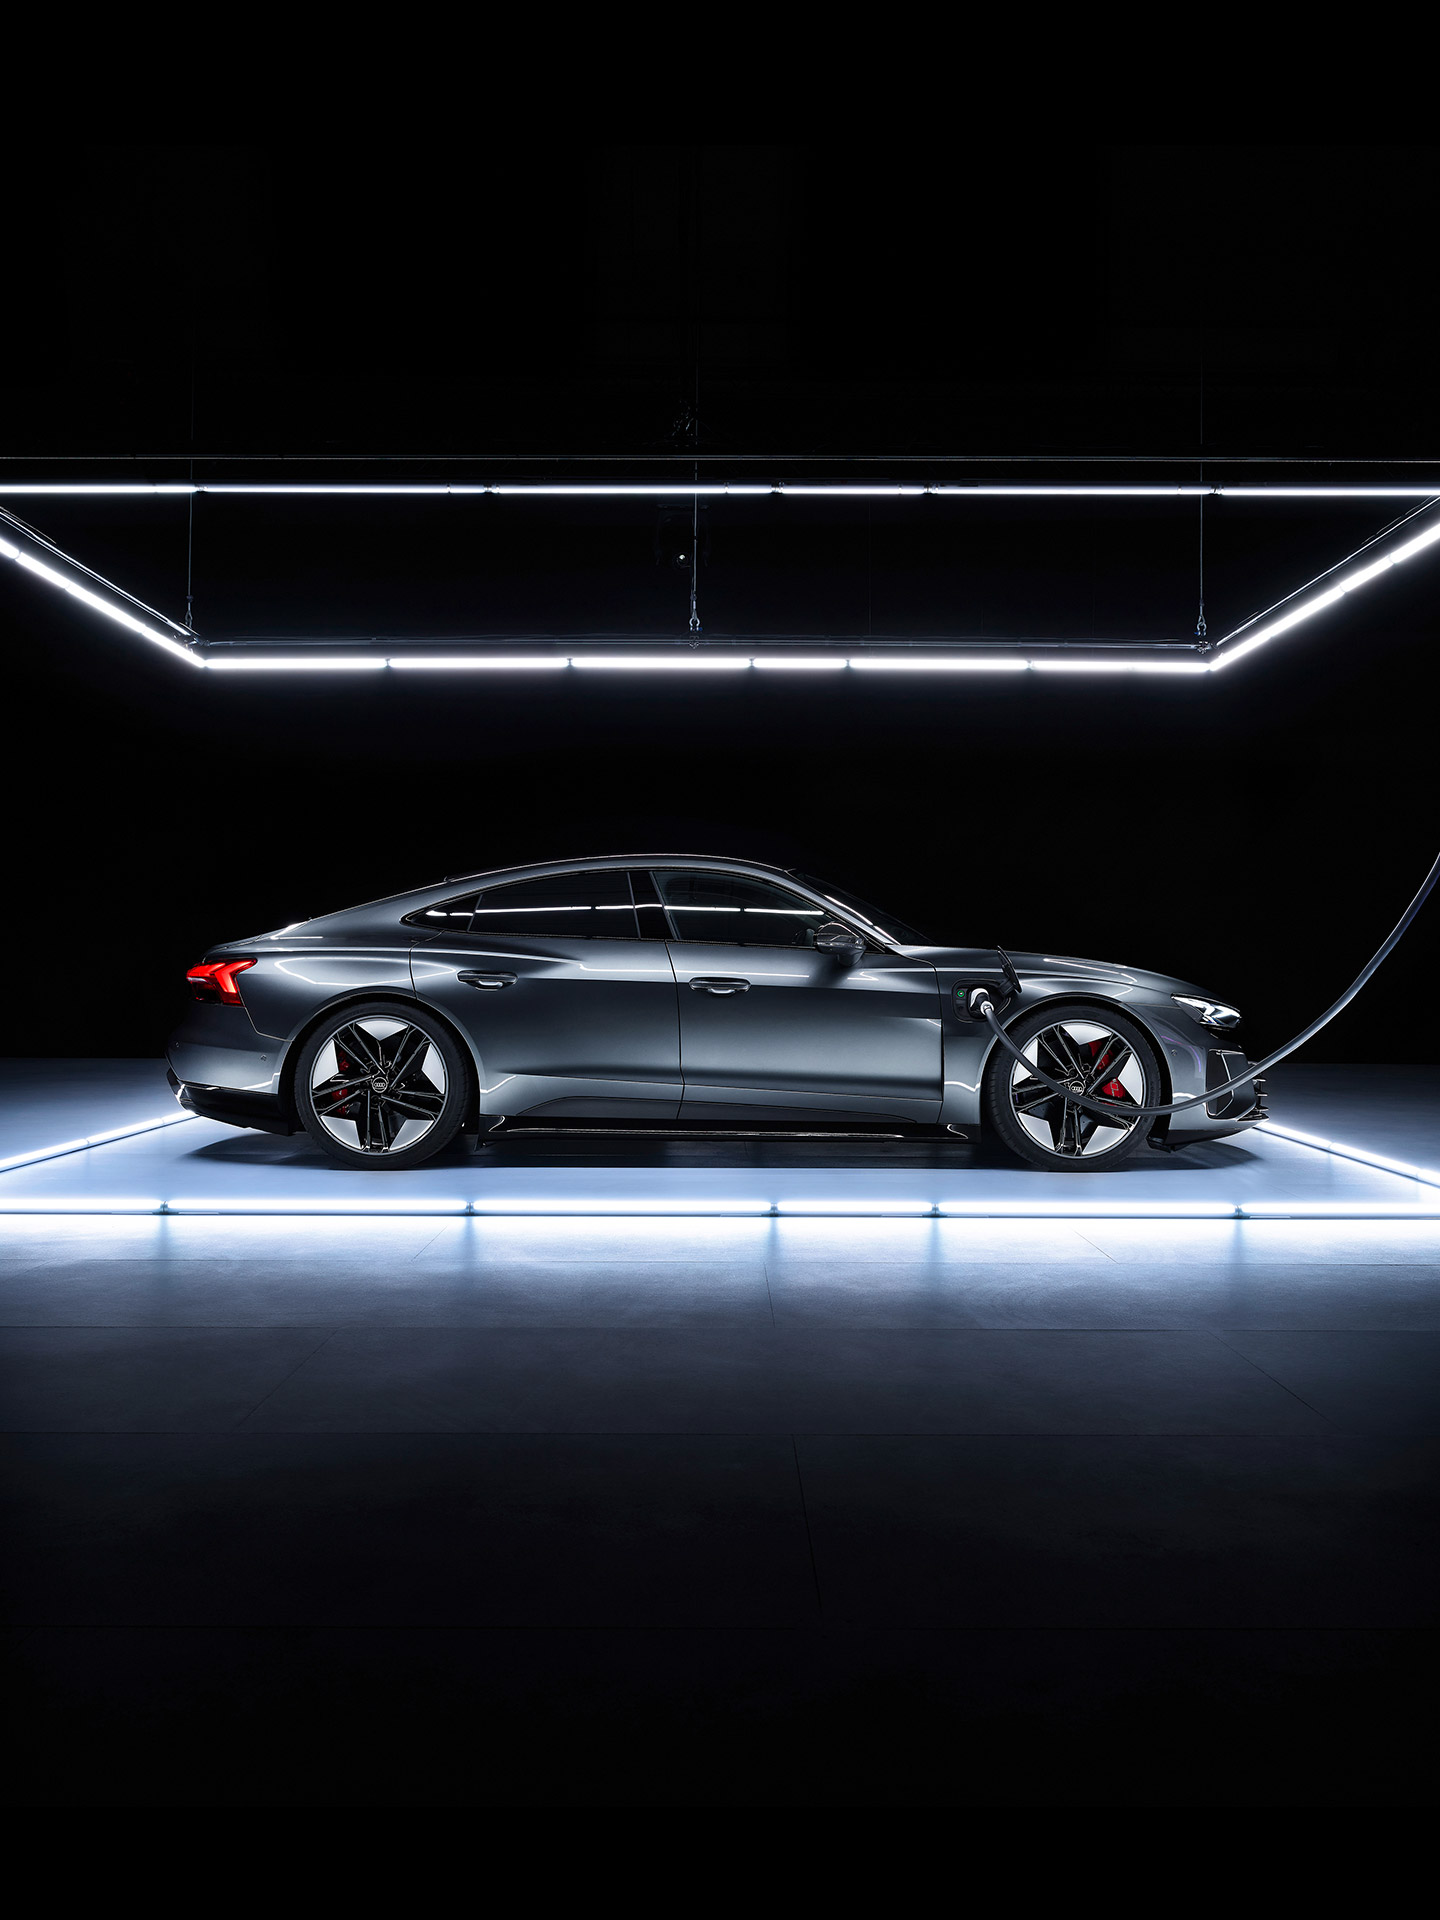 Shifting image of a gray Audi e-tron GT parked in front of a daytime city skline and on an illuminated platform in a dark room. 